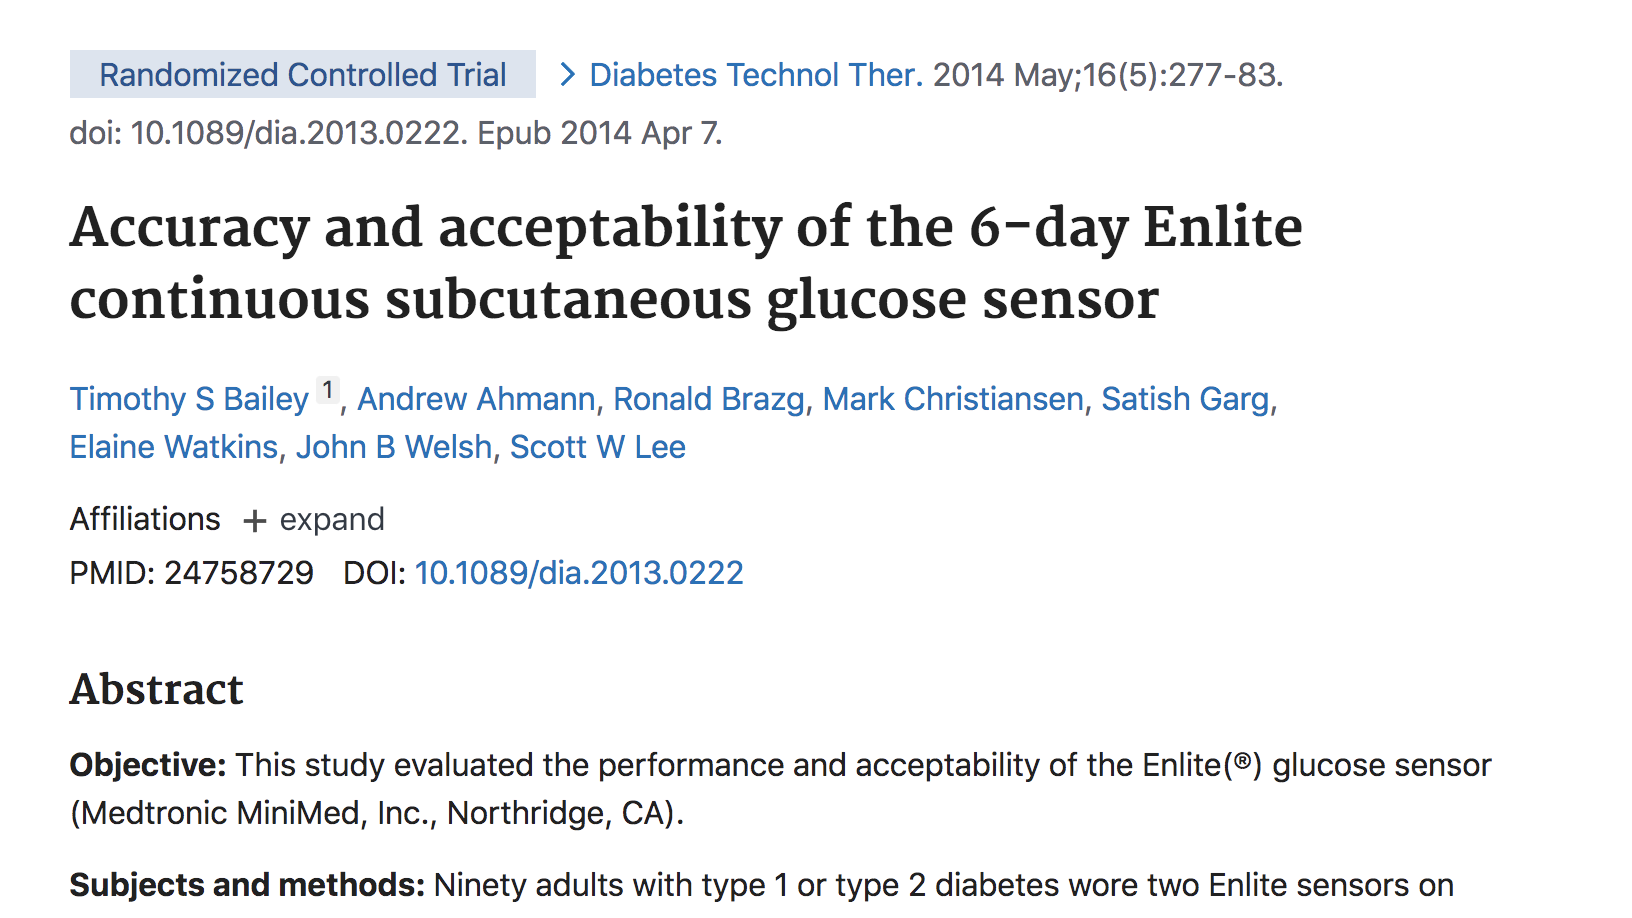 Accuracy and acceptability of the 6-day Enlite continuous subcutaneous glucose sensor thumbnail